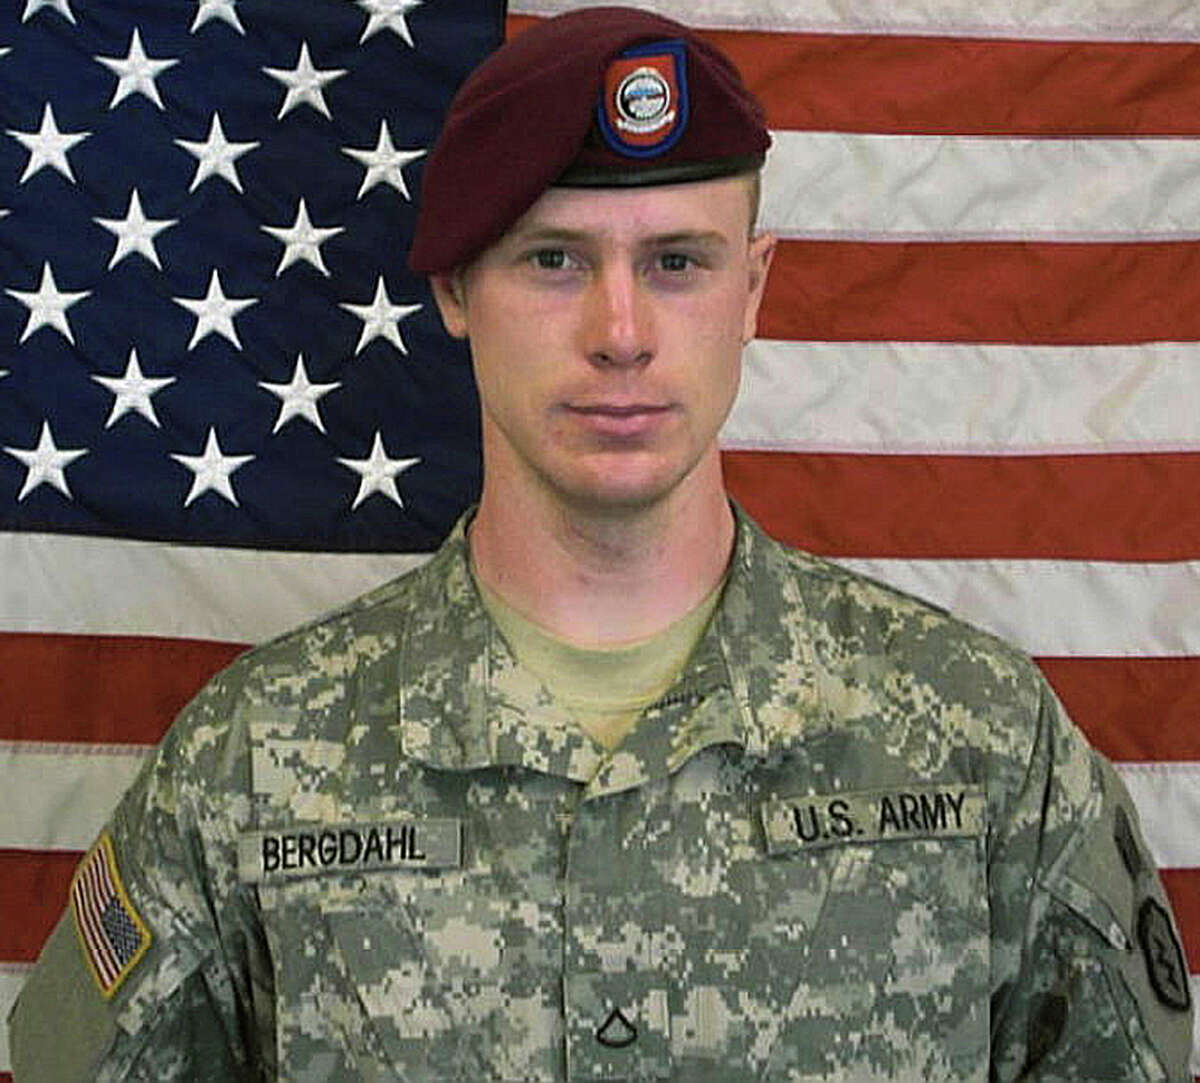 FILE - This undated file image provided by the U.S. Army shows Sgt. Bowe Bergdahl. The attorney for Bergdahl, who was released in exchange for five Taliban detainees from Guantanamo Bay, says the soldier's case has been referred for trial by a general court-martial. (AP Photo/U.S. Army, File)